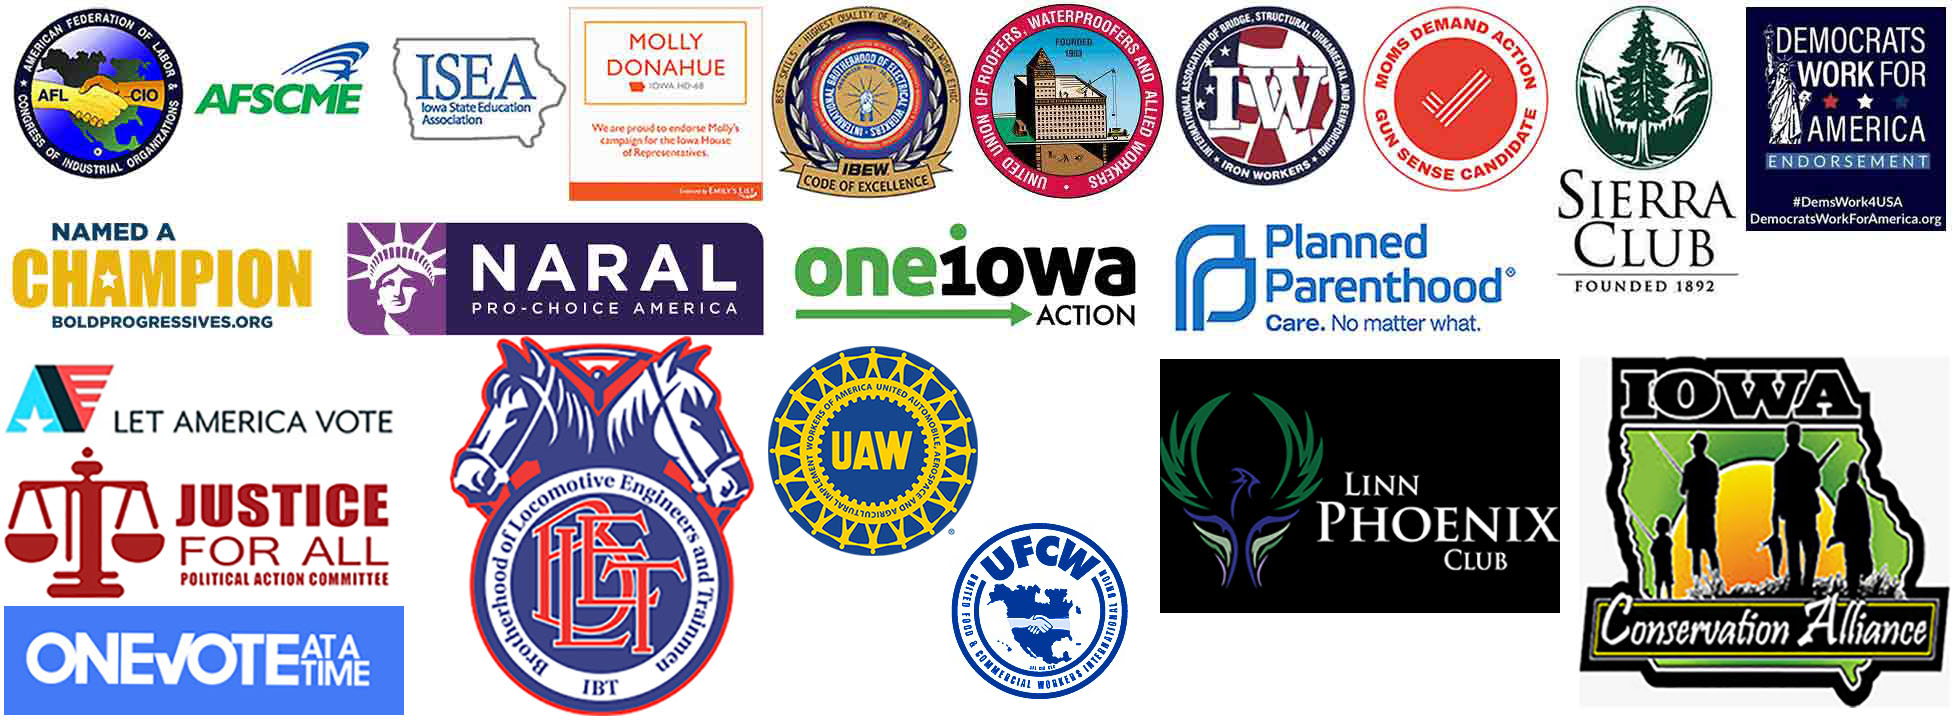 Molly Donahue is endorsed by the AFL-CIO, ASCME, Progressive Change Campaign Committee, Emily's List, Iowa State Education Association, Iron Workers Union, Planned Parenthood, Sierra Club, Mom's Demand Action, NARAL, IBEW local 1362, United Union of Roofers, Waterproofers and Allied Workers, One Iowa Action and Democrats Work for America, Let America Vote, One Vote at a Time, Brotherhood of Locomotive Engineers and Trainmen, United Food & Commercial Workers International Union, Justice for All, Linn Phoenix Club, United Automobile, Aerospace and Agricultural Implement Workers of America, Iowa Conservation Alliance